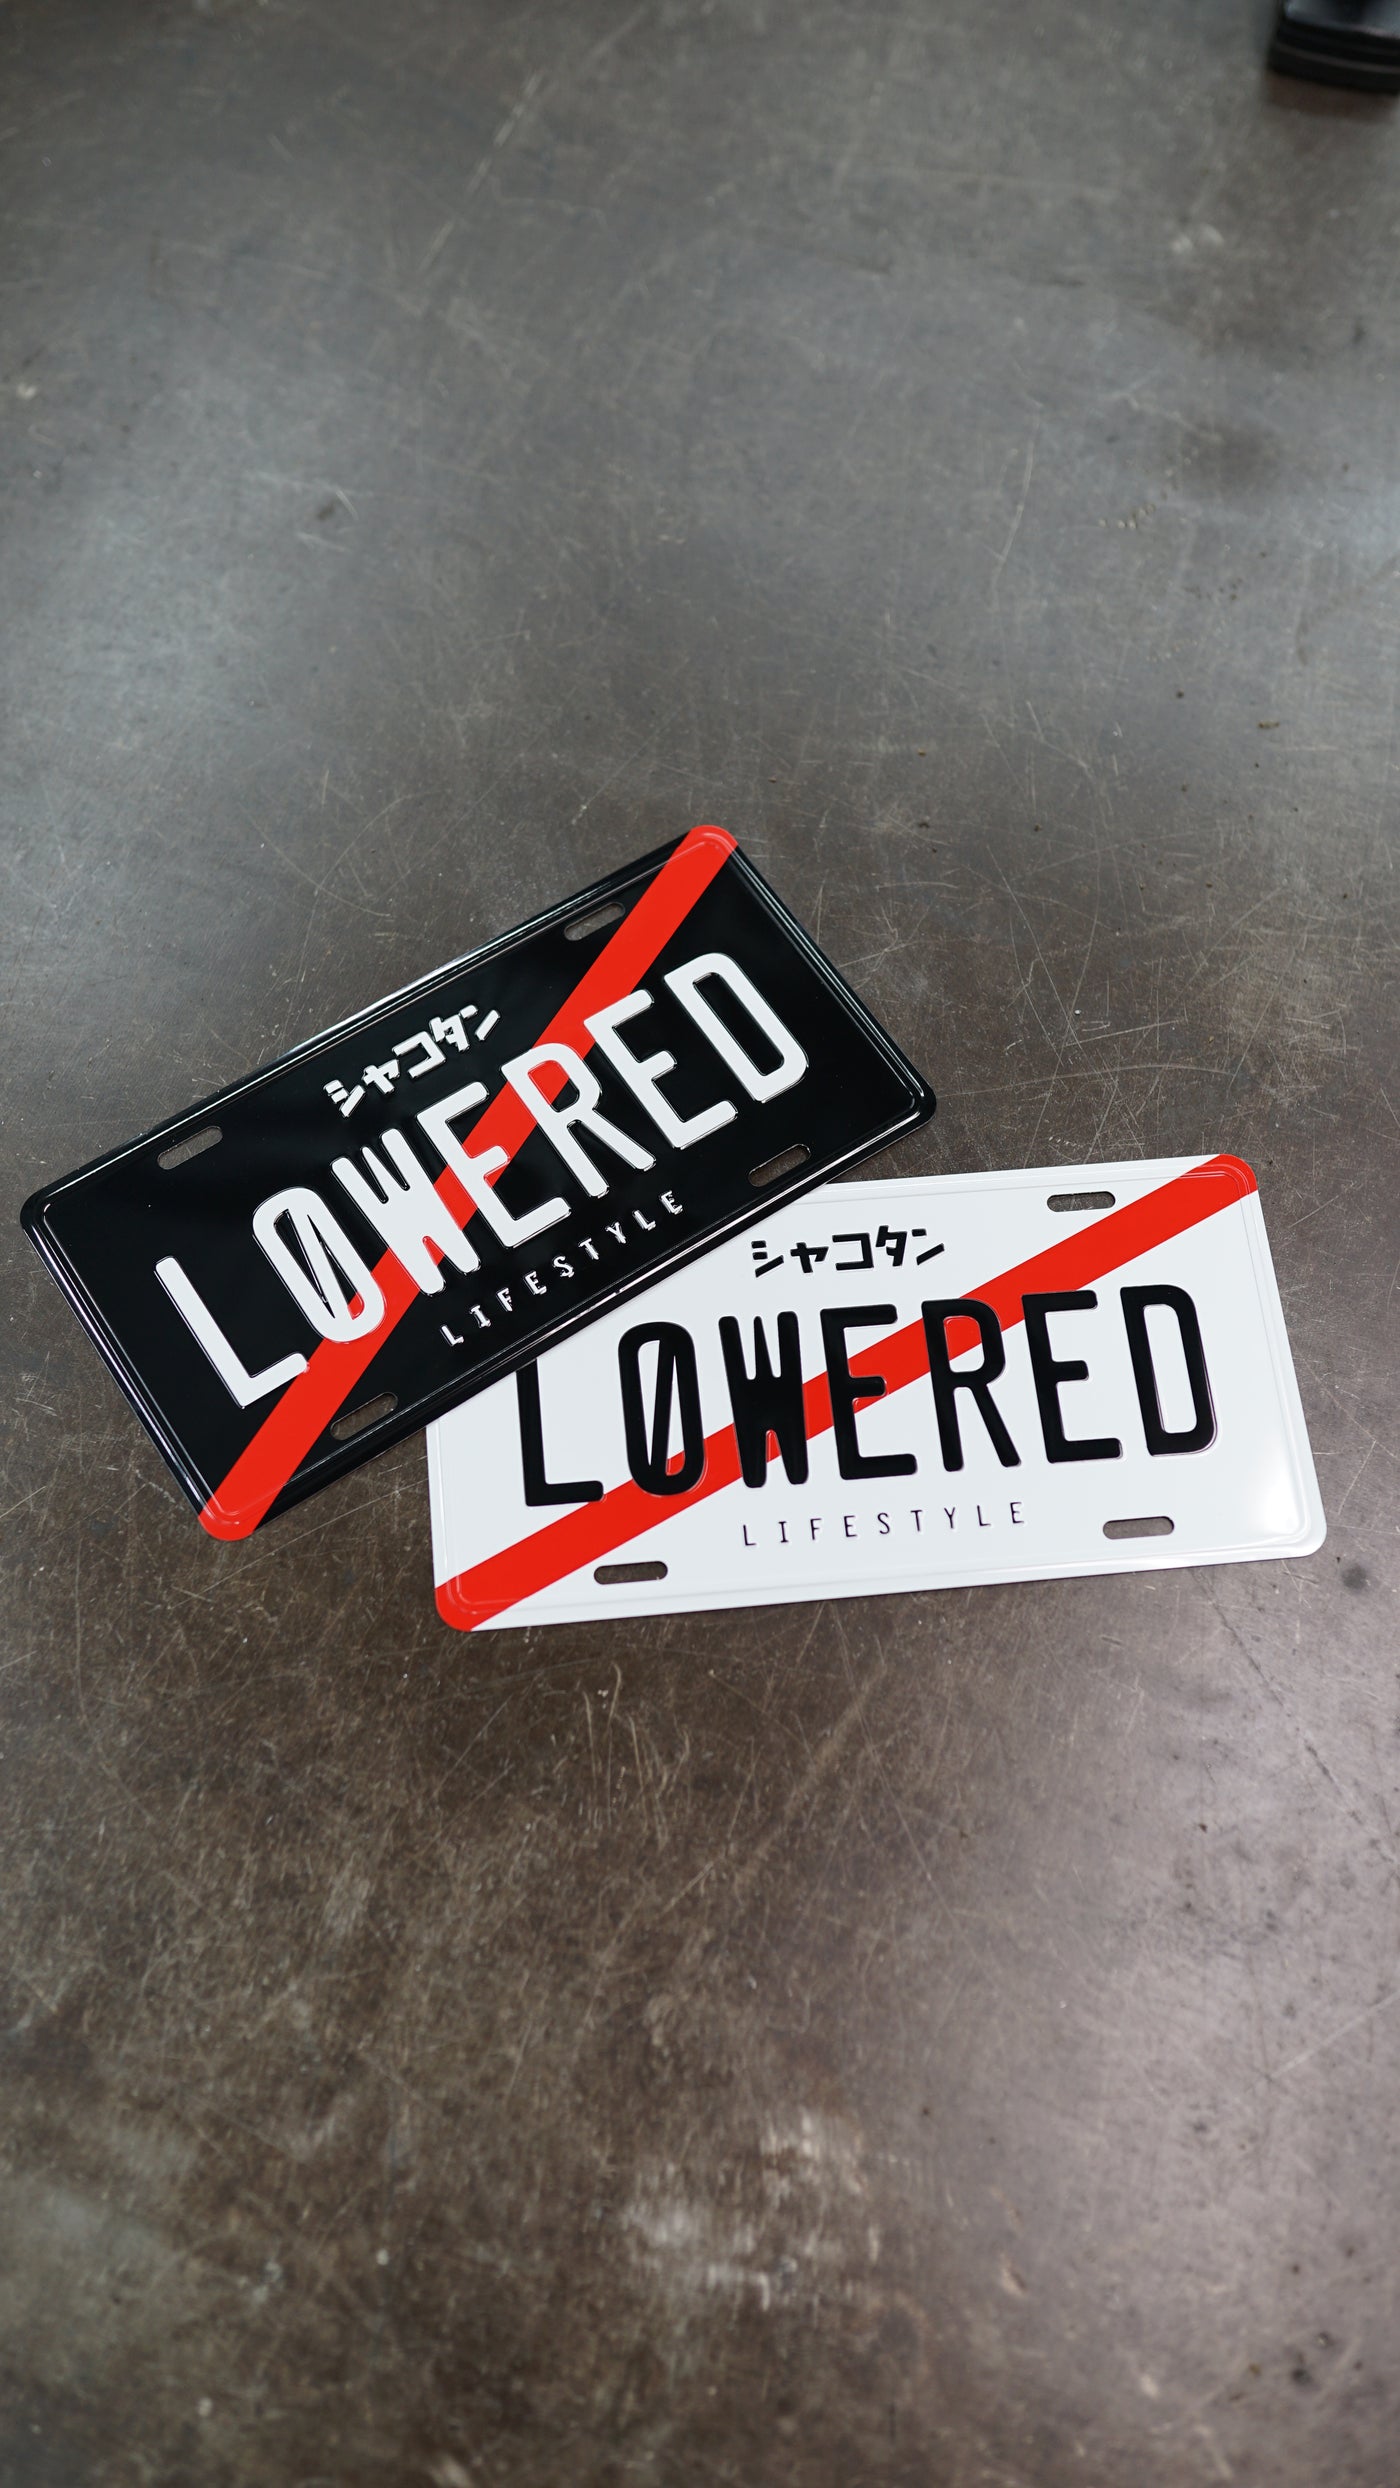 Lowered Lifestyle License Plate (JDM White)